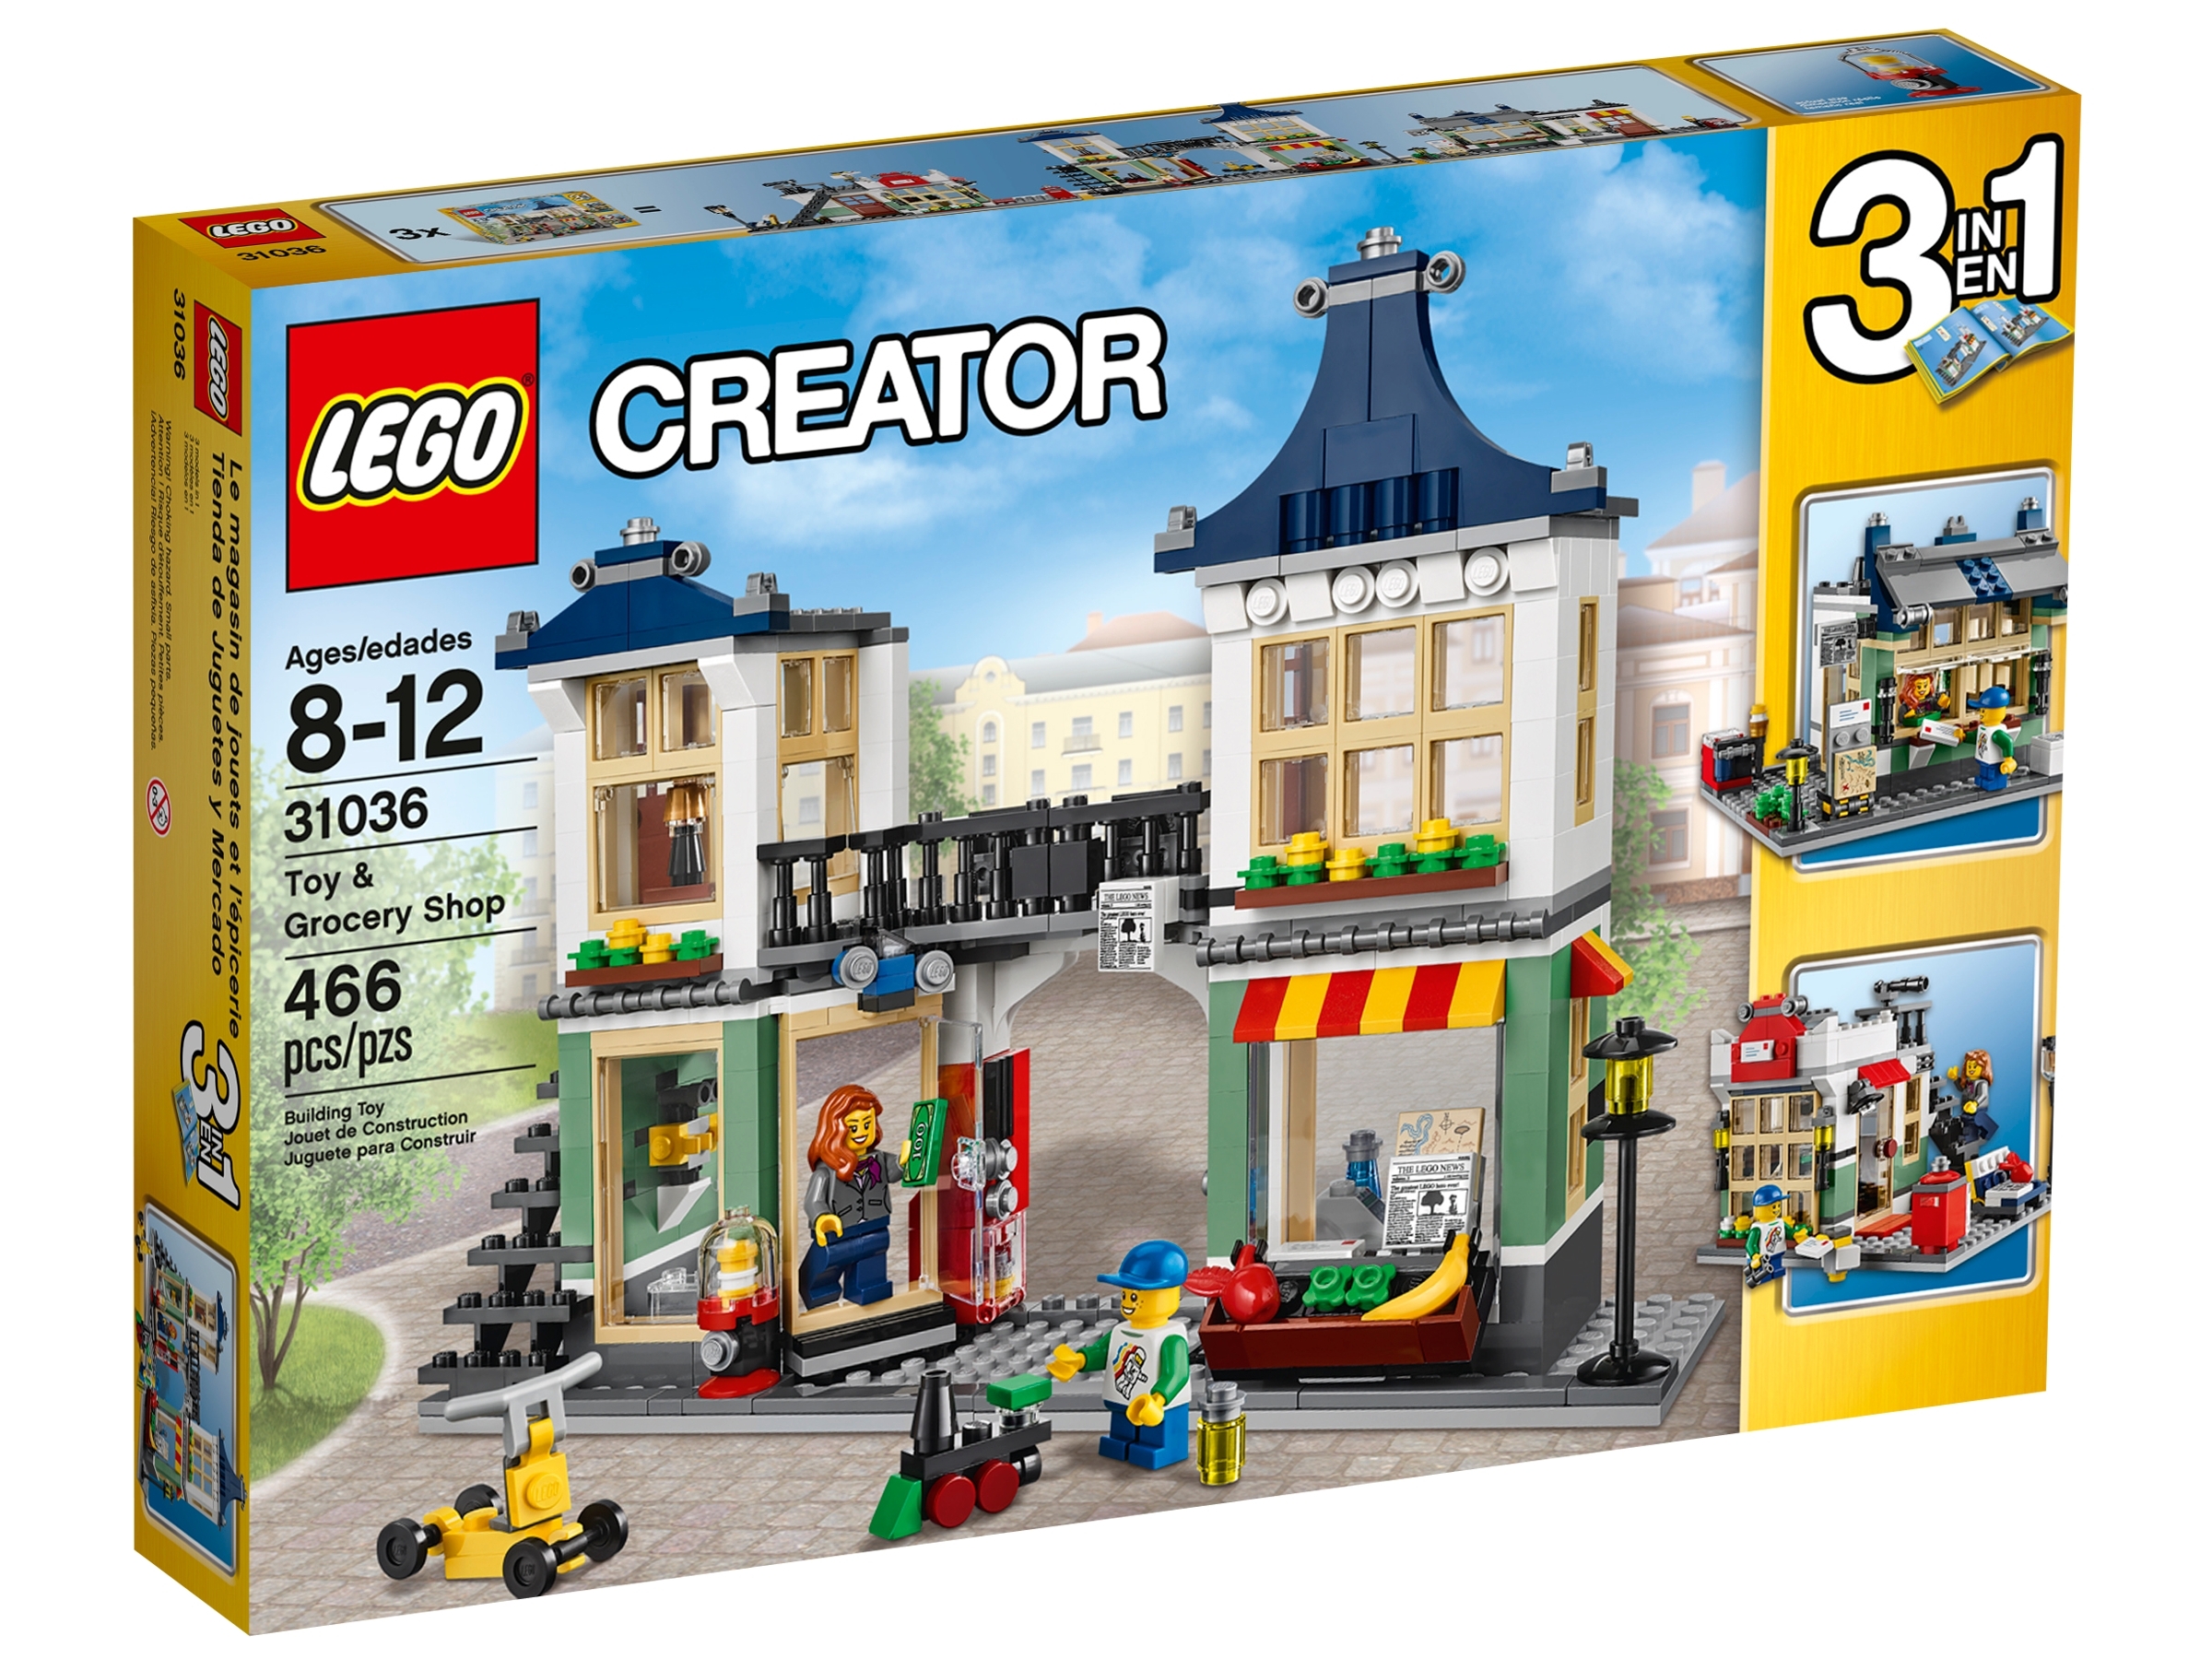 Toy & Grocery Shop 31036, Creator 3-in-1